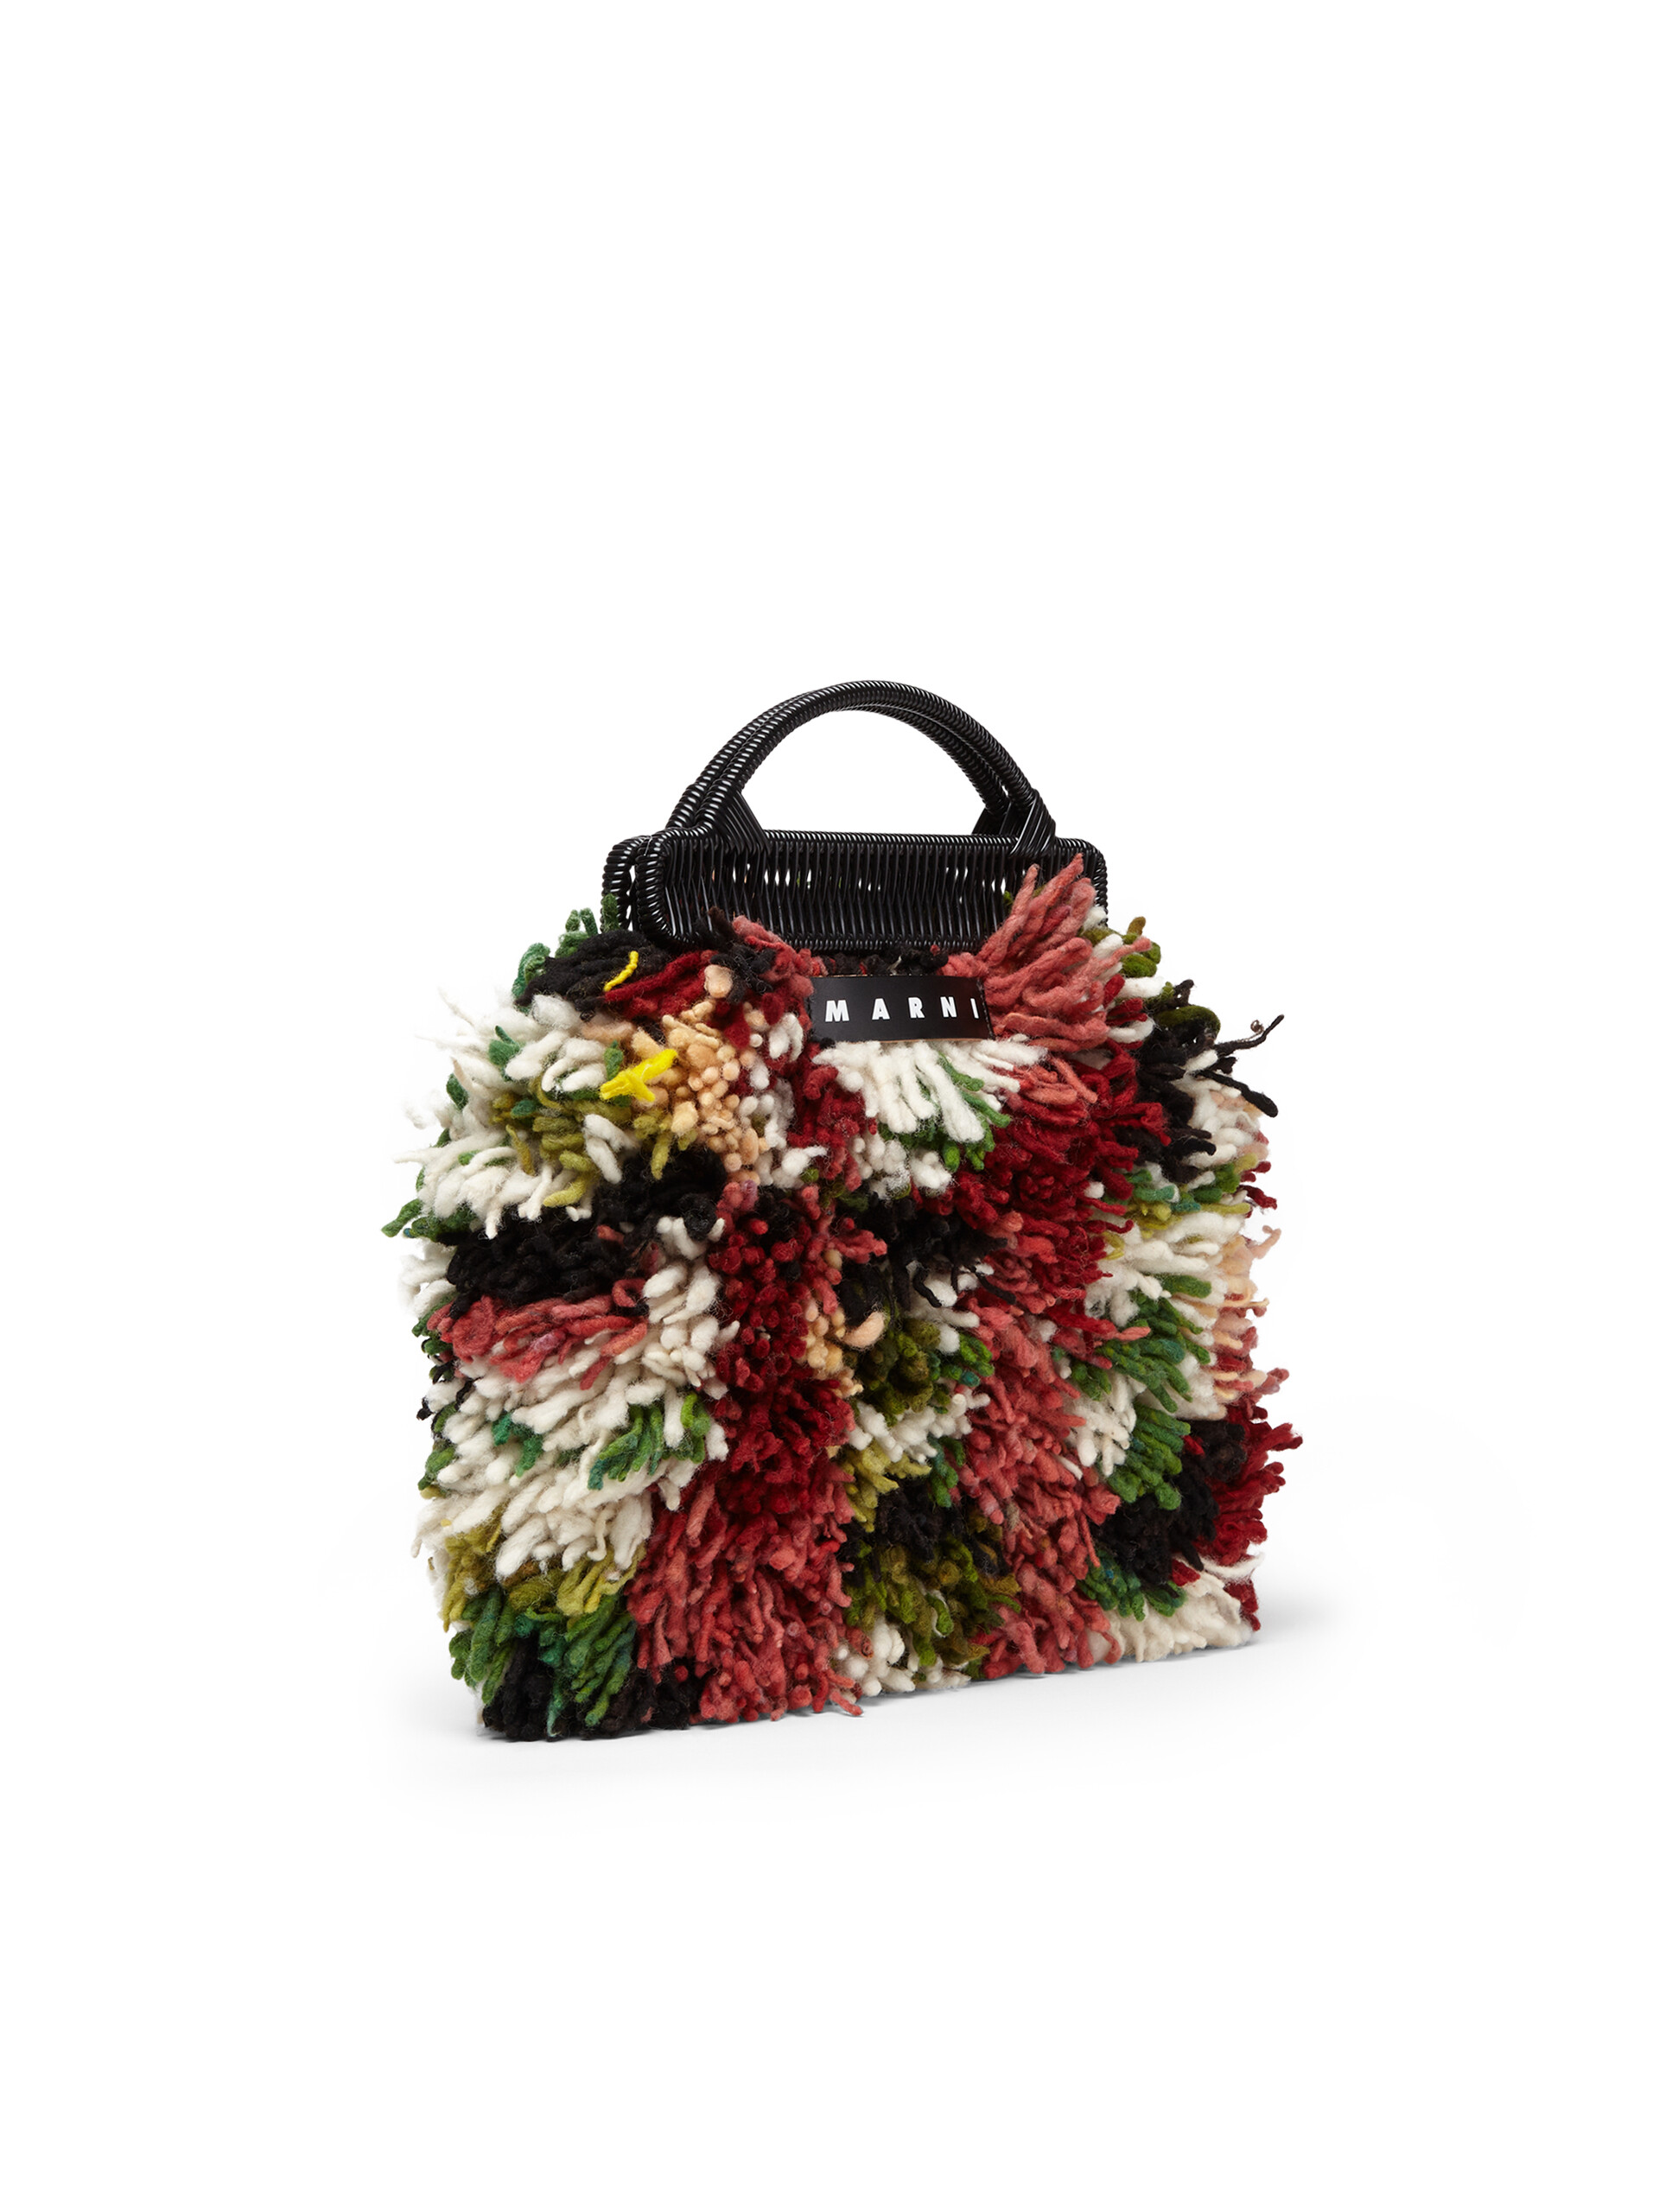 MARNI MARKET multicoloured frame bag in green burgundy and white long wool - Furniture - Image 2